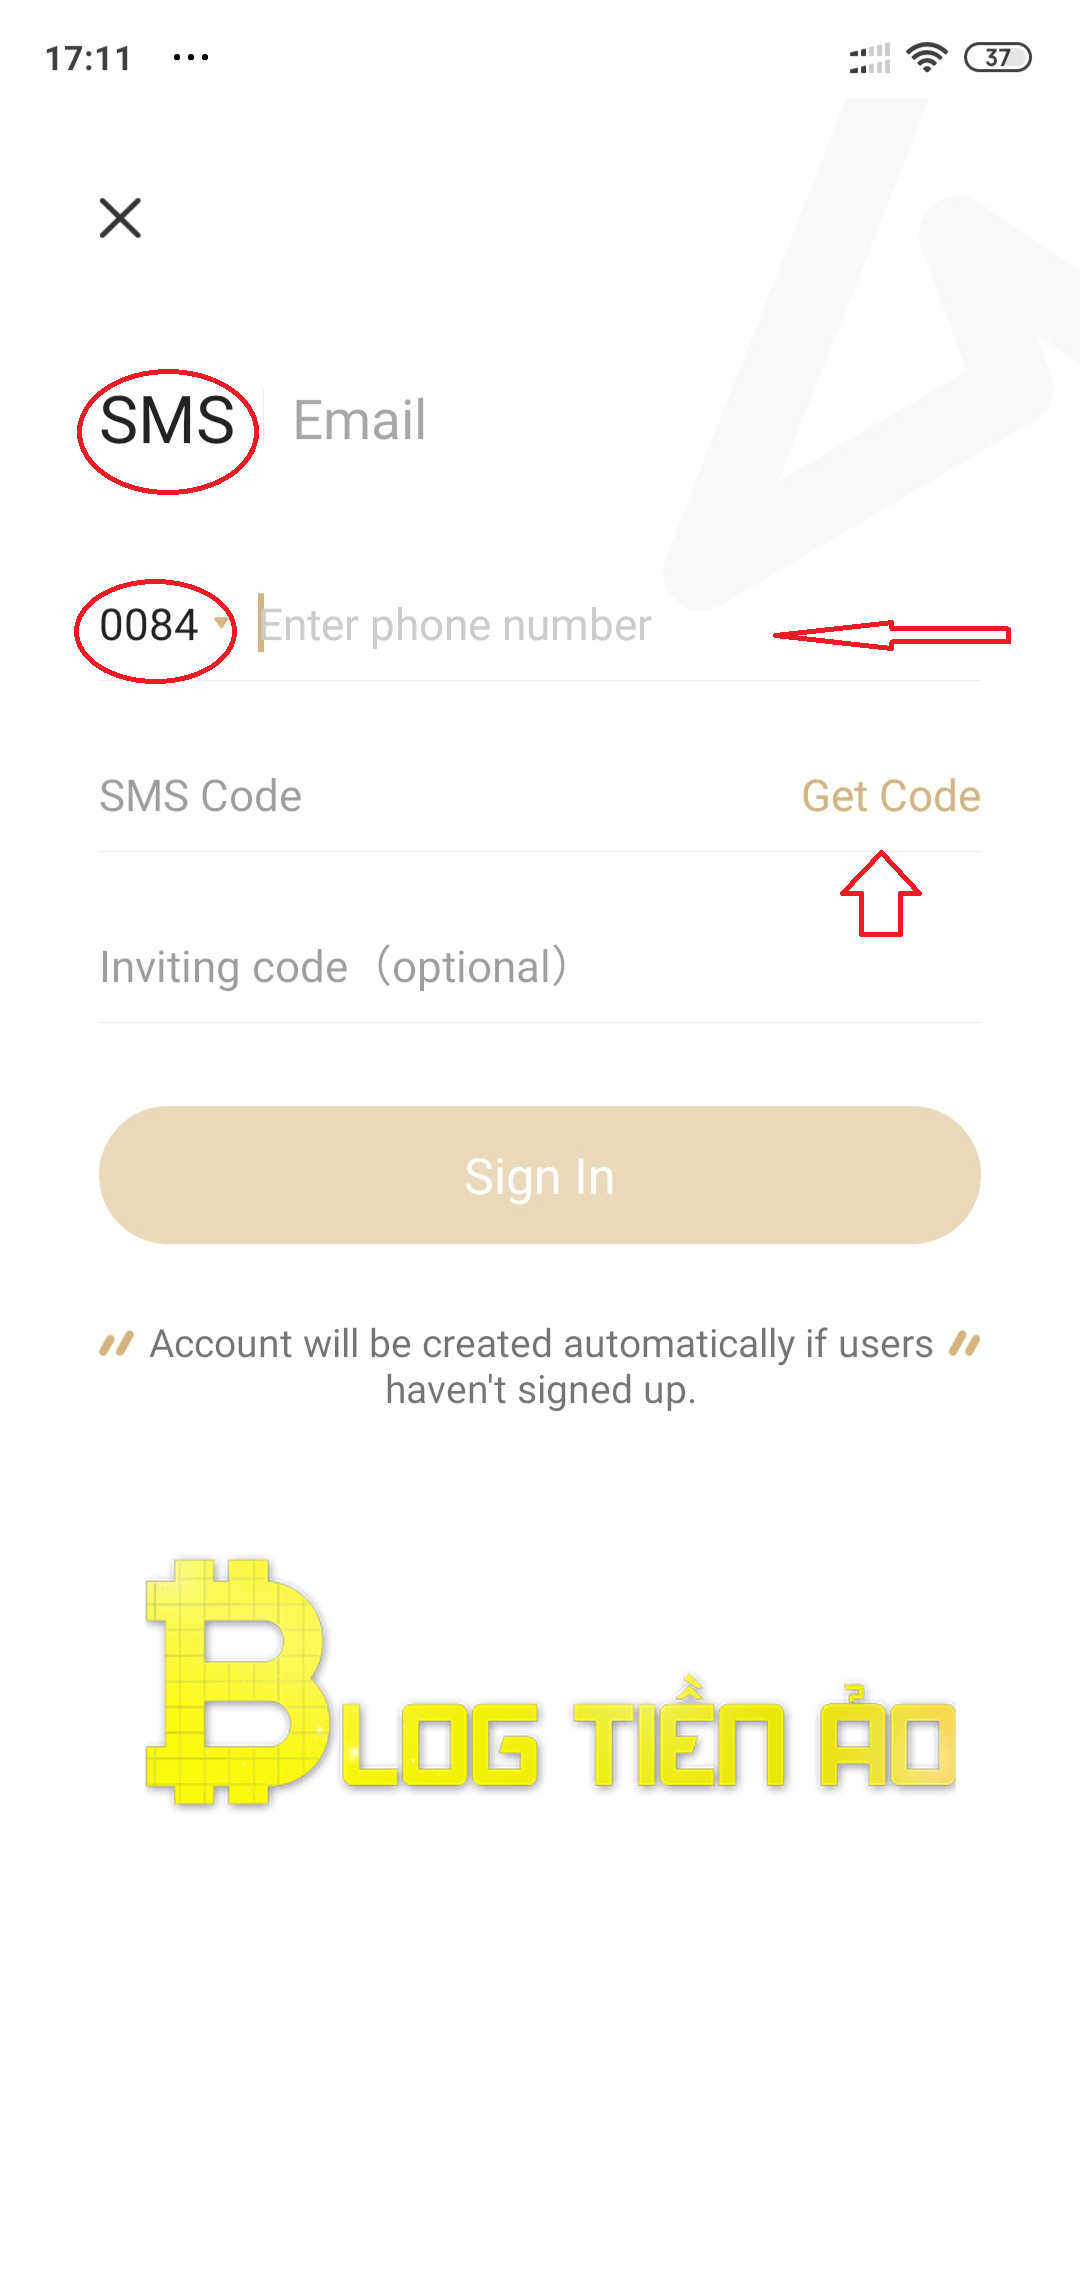 Enter your phone number to create a Wallet account